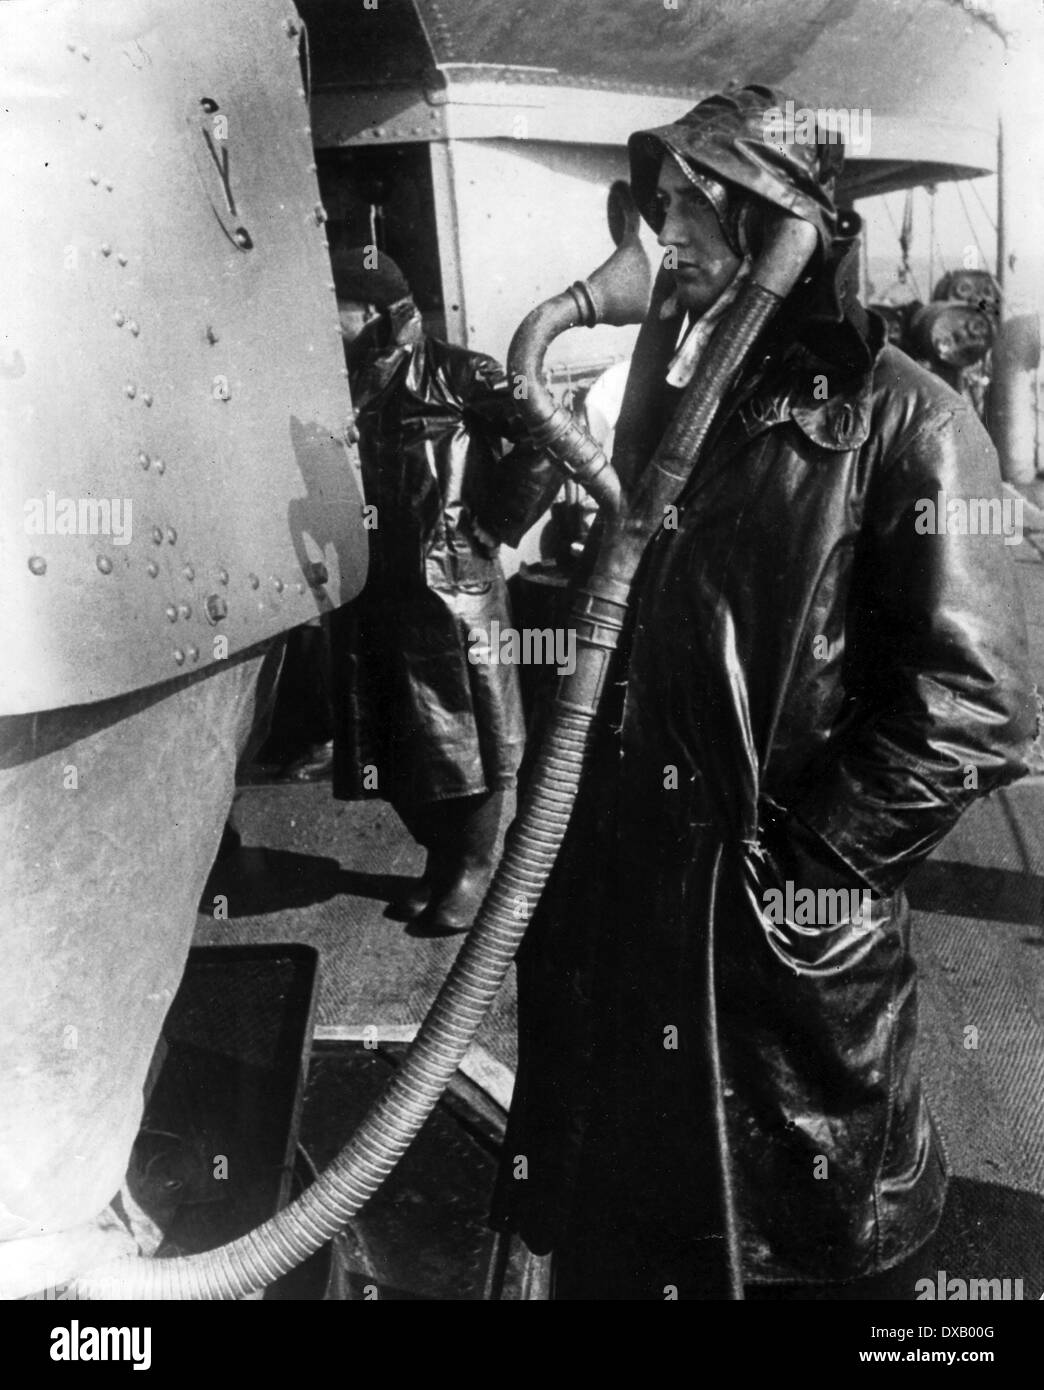 Royal Navy world war two. A gunner wearing communications voice tube headset during WW11 Stock Photo